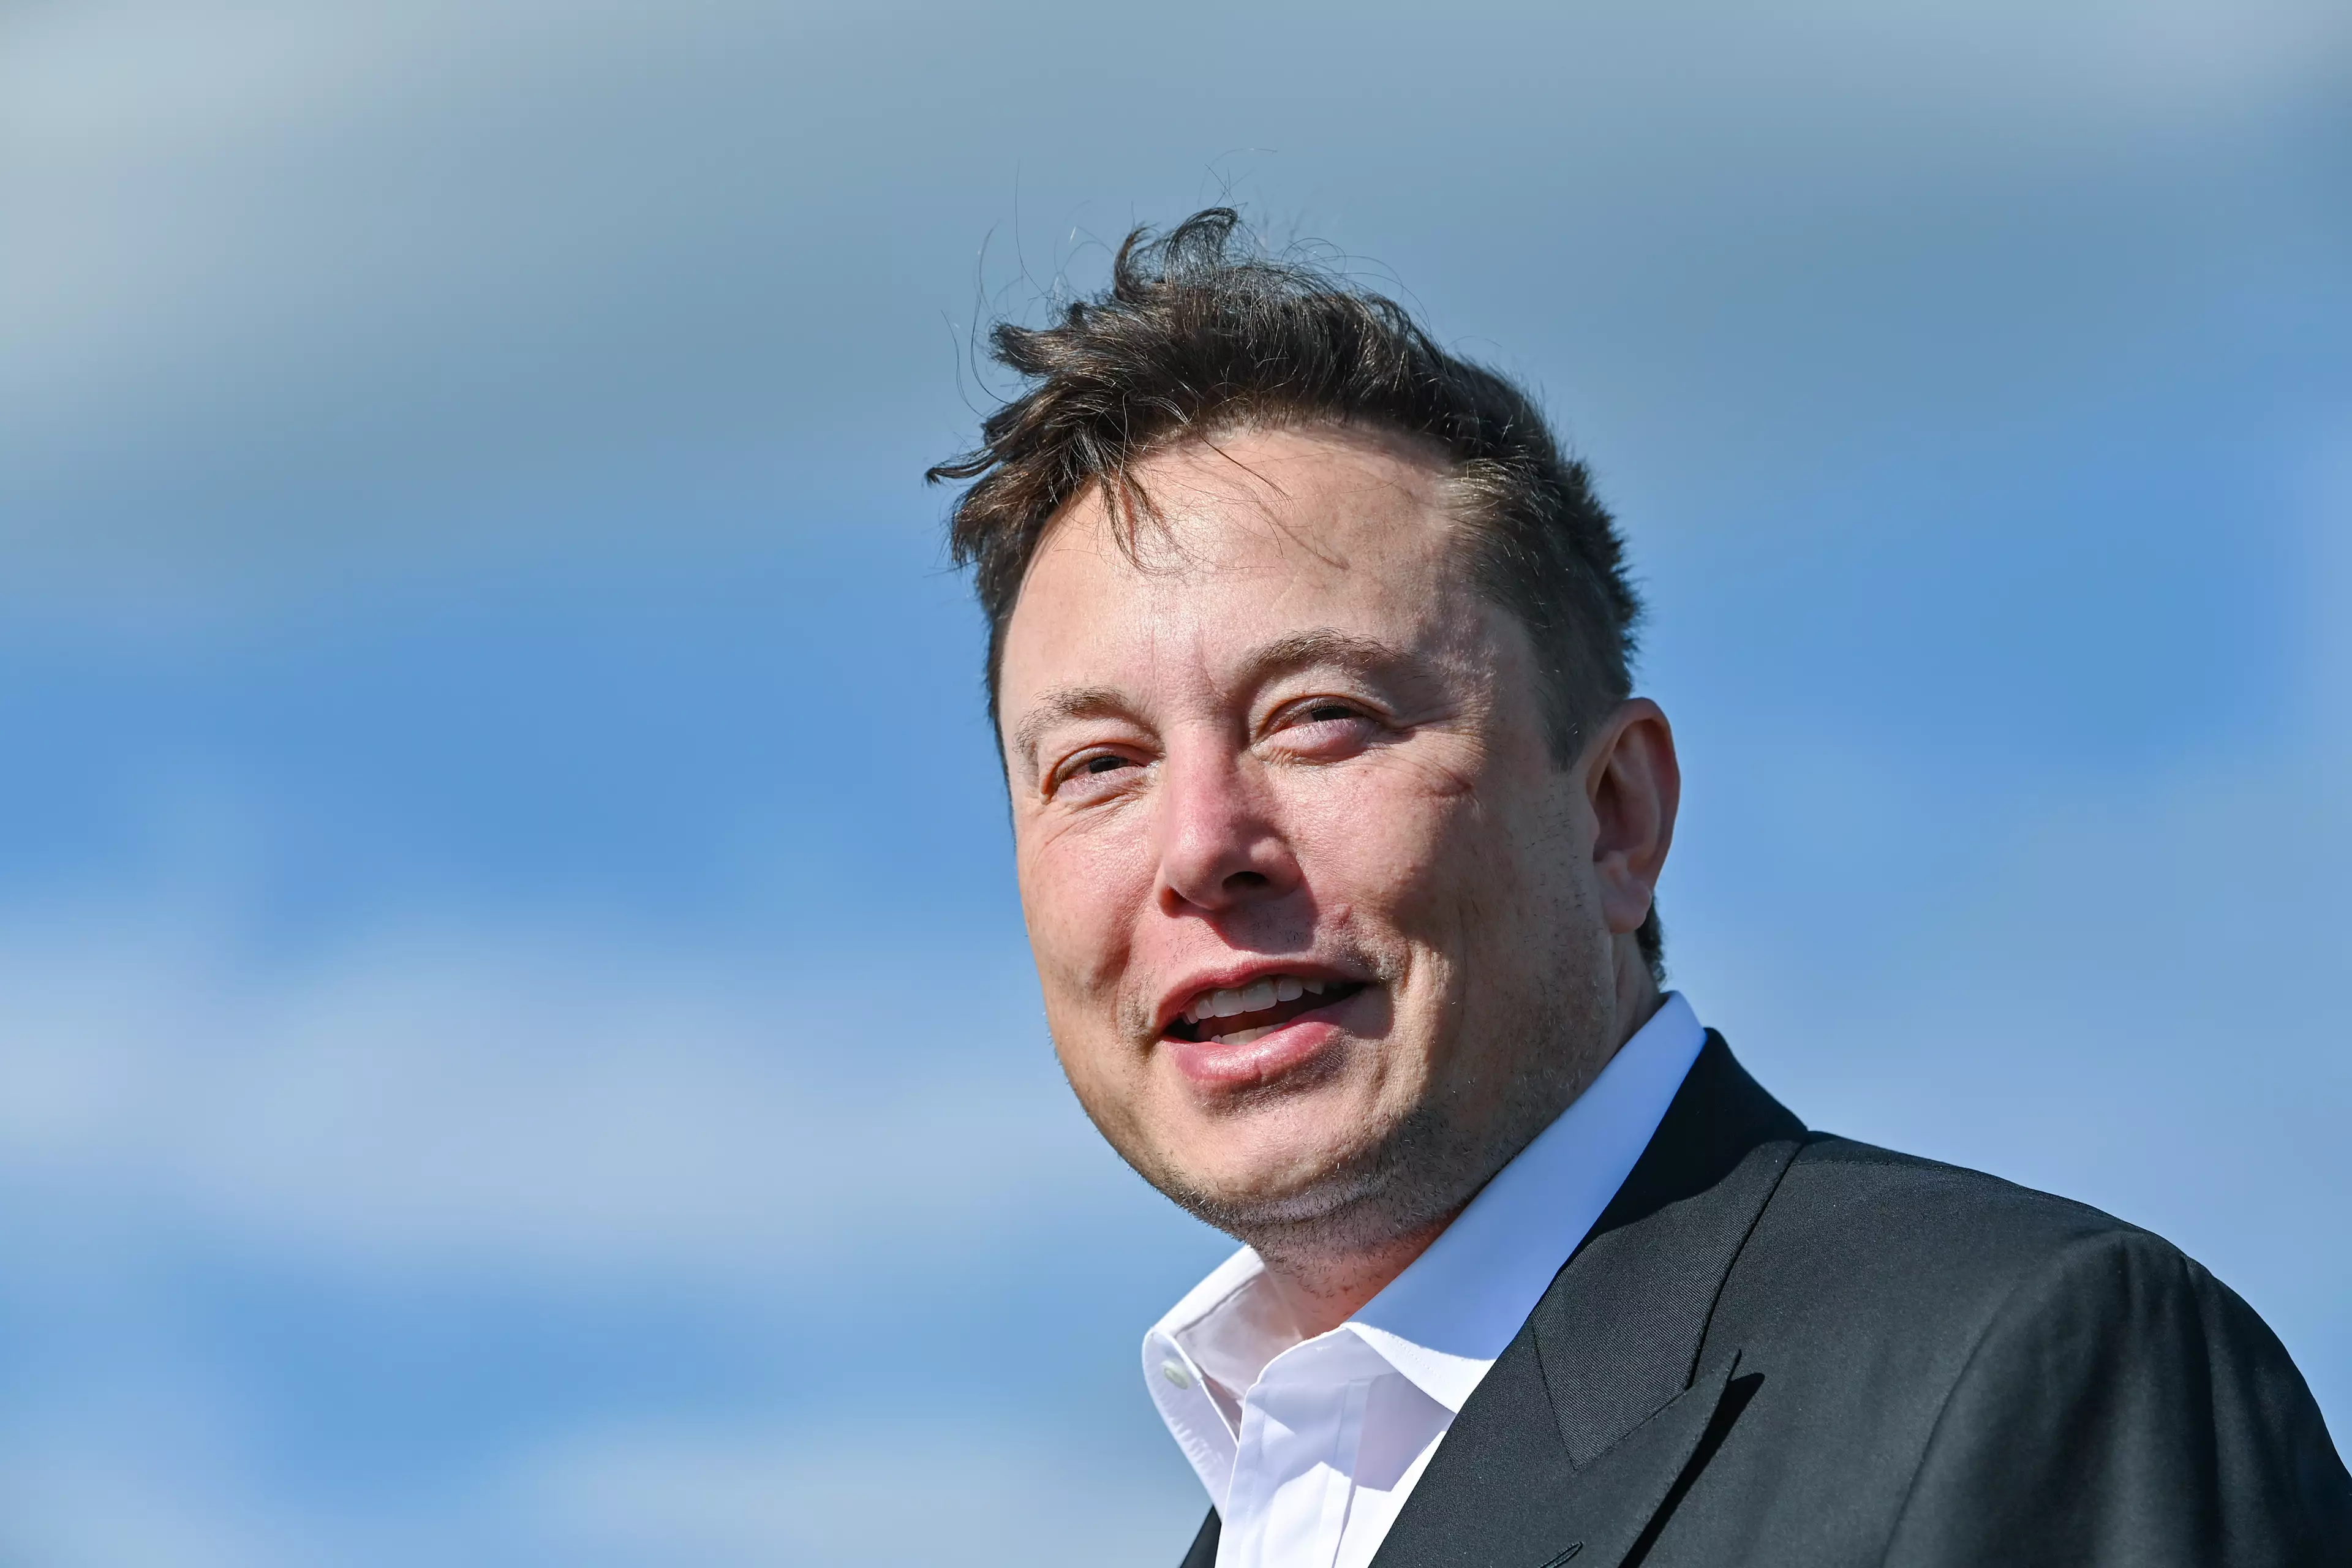 Elon Musk Believes 'All These Pronouns' Are An 'Aesthetic Nightmare'